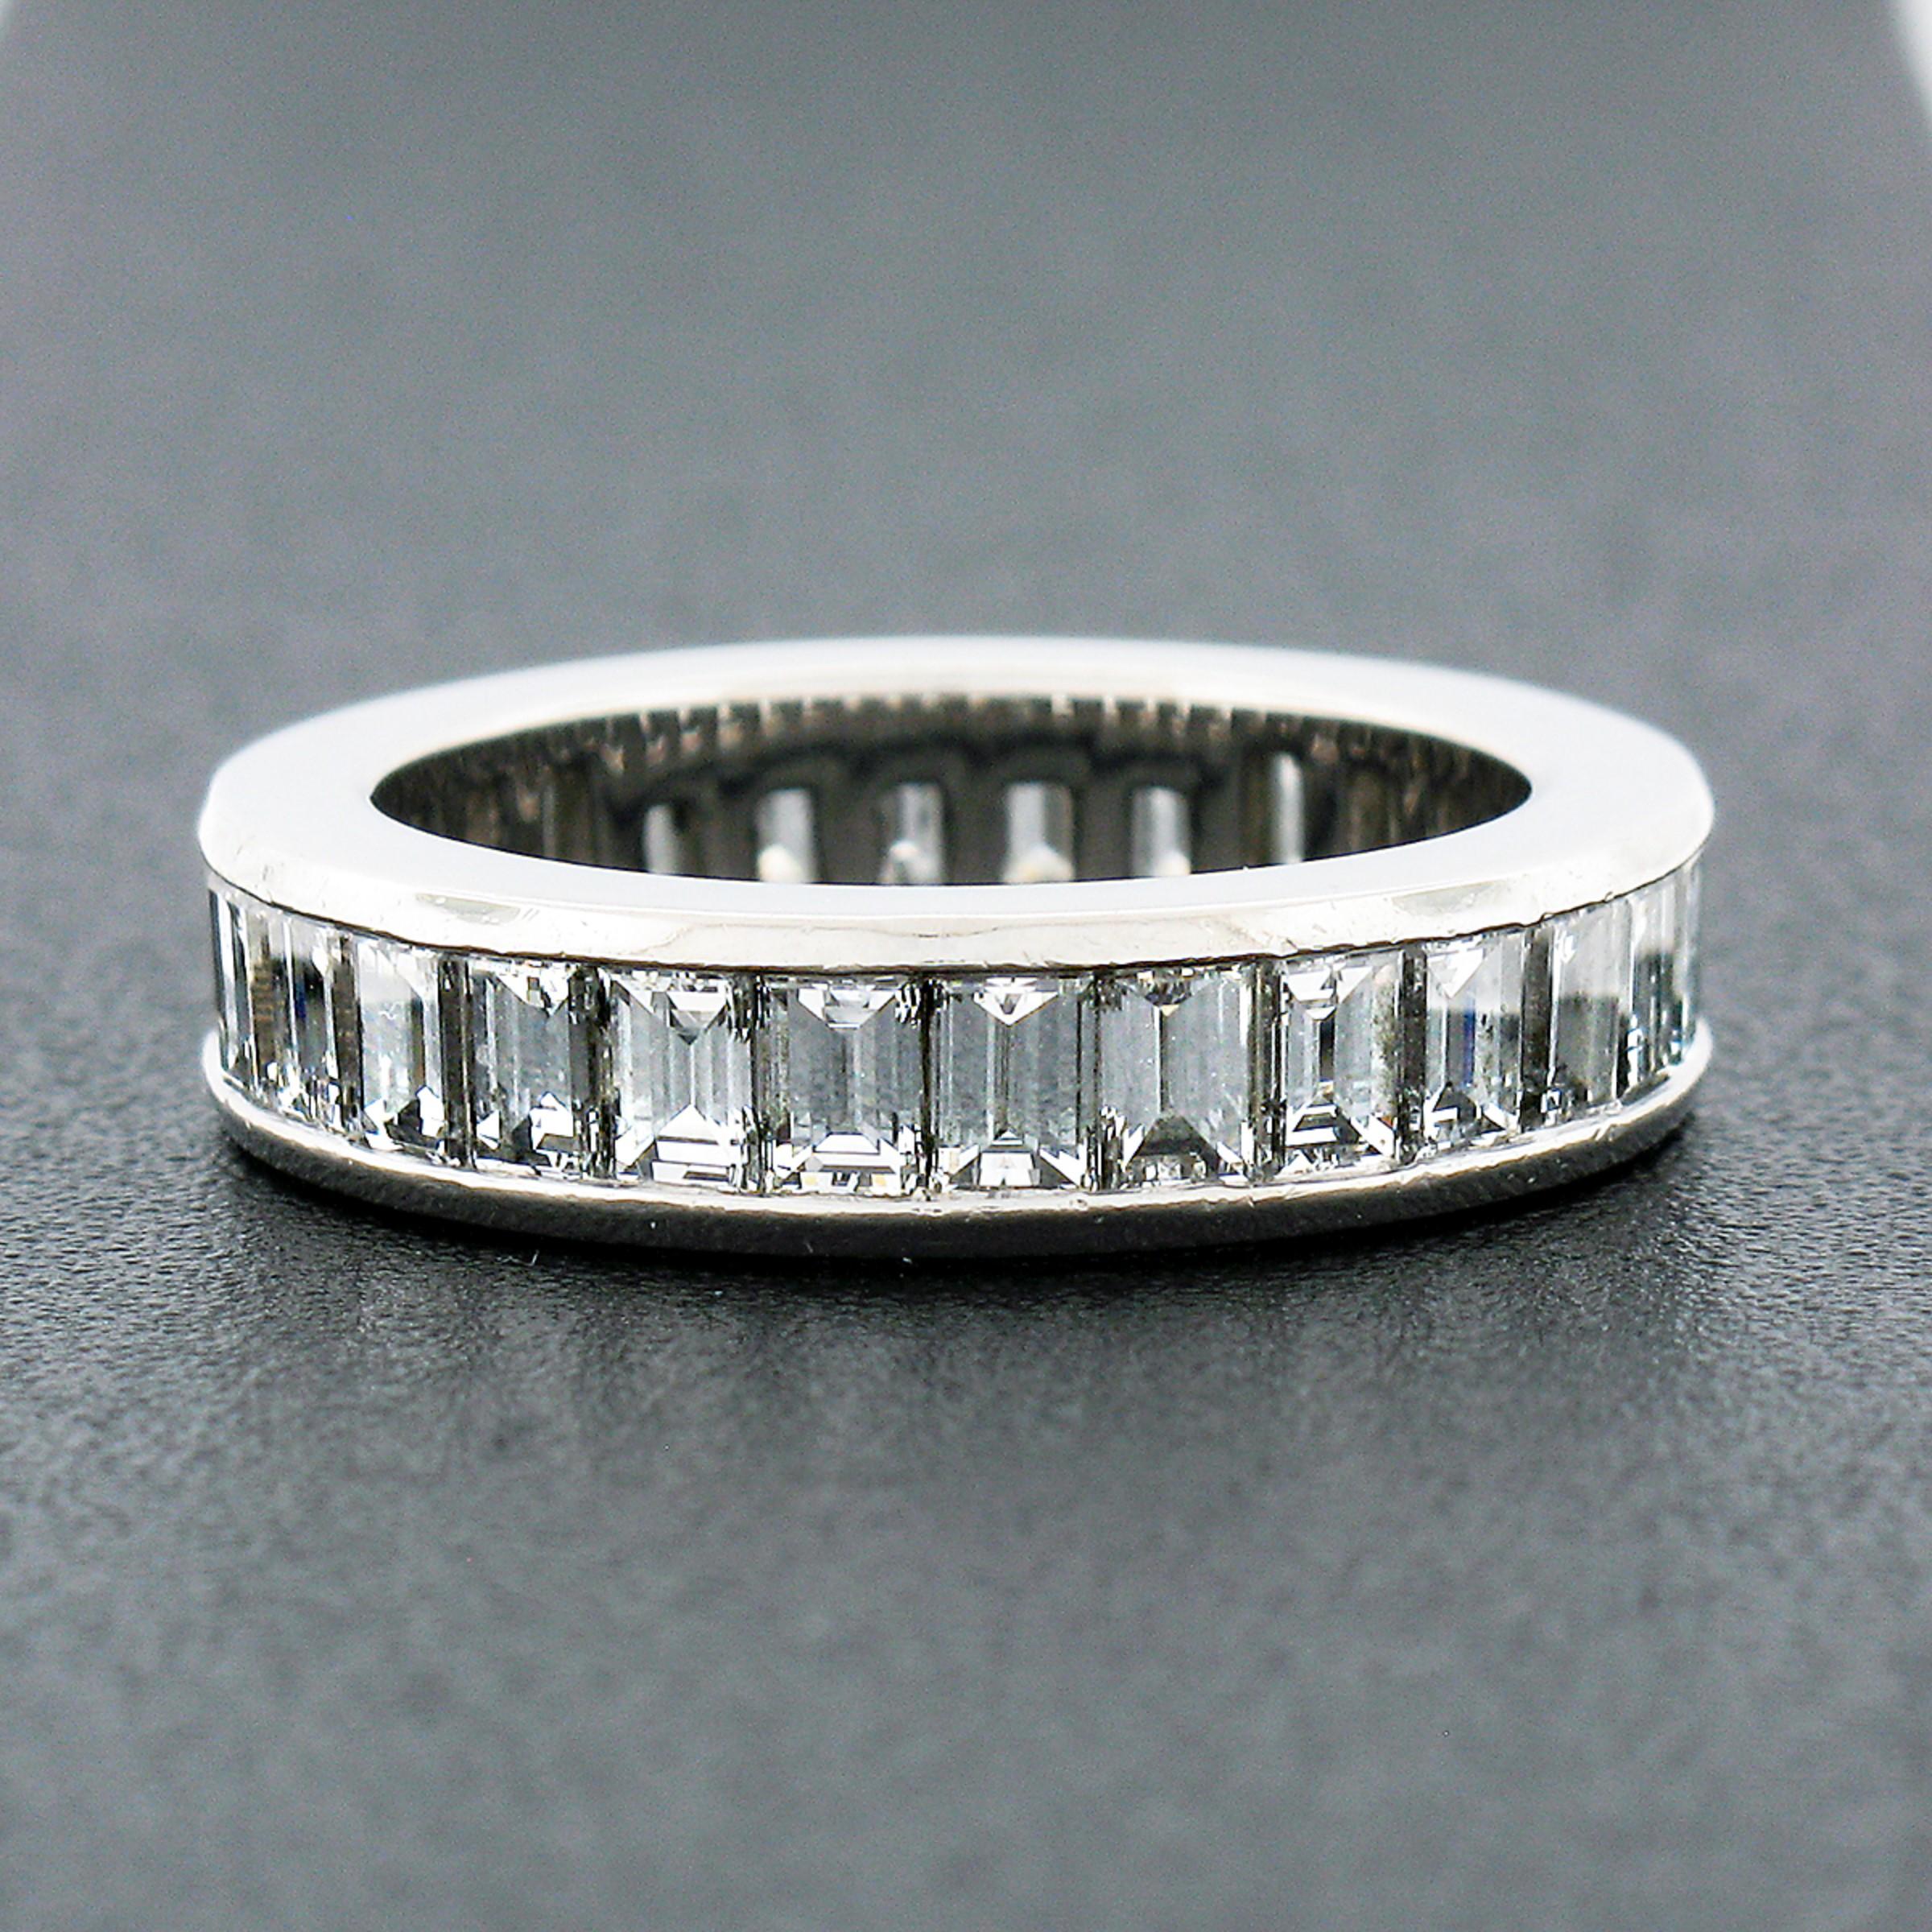 This absolutely gorgeous diamond eternity band is crafted in solid .950 platinum and designed by Tiffany & Co. featuring SUPER FINE quality straight baguette cut diamonds neatly channel set entirely throughout. The ring contains 28 diamonds which